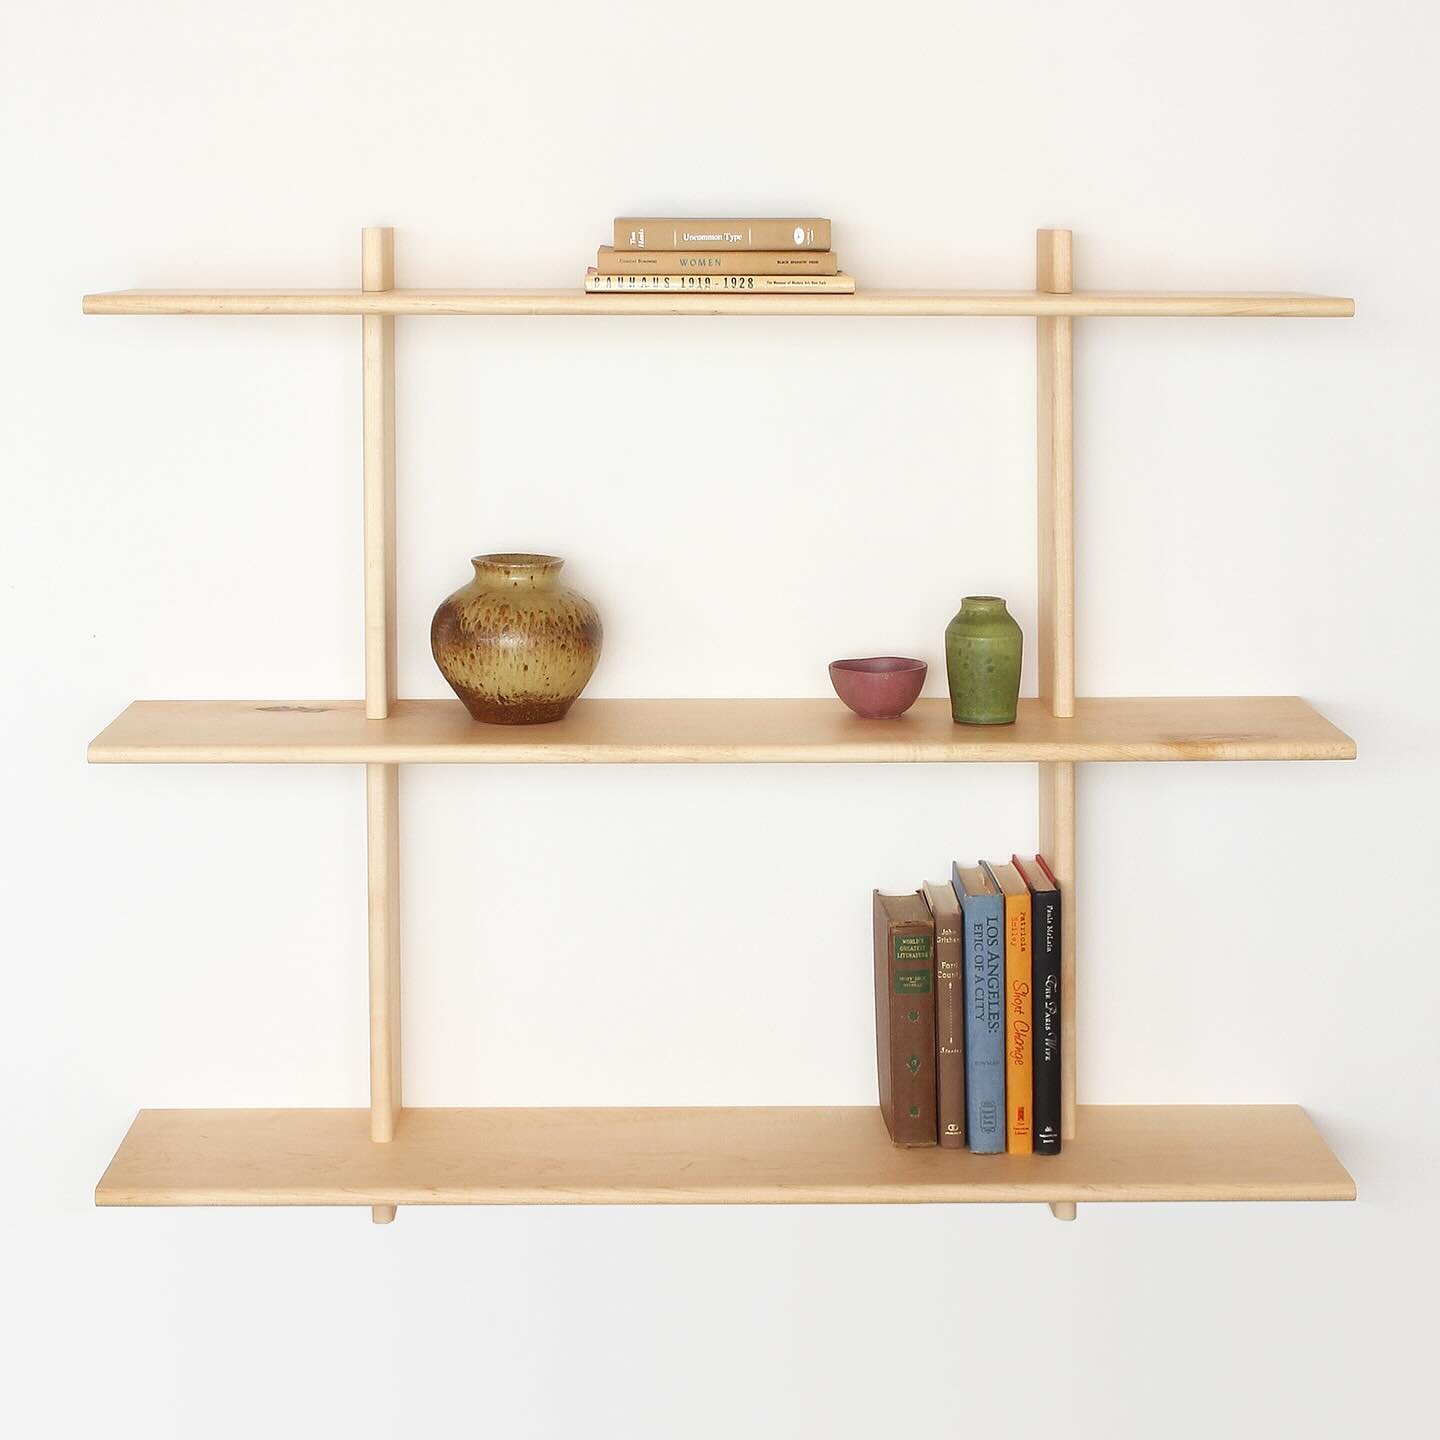 48&rdquo; Wide solid maple wall hanging shelving unit with 10&rdquo; deep shelves, available now and ready to ship&hellip;